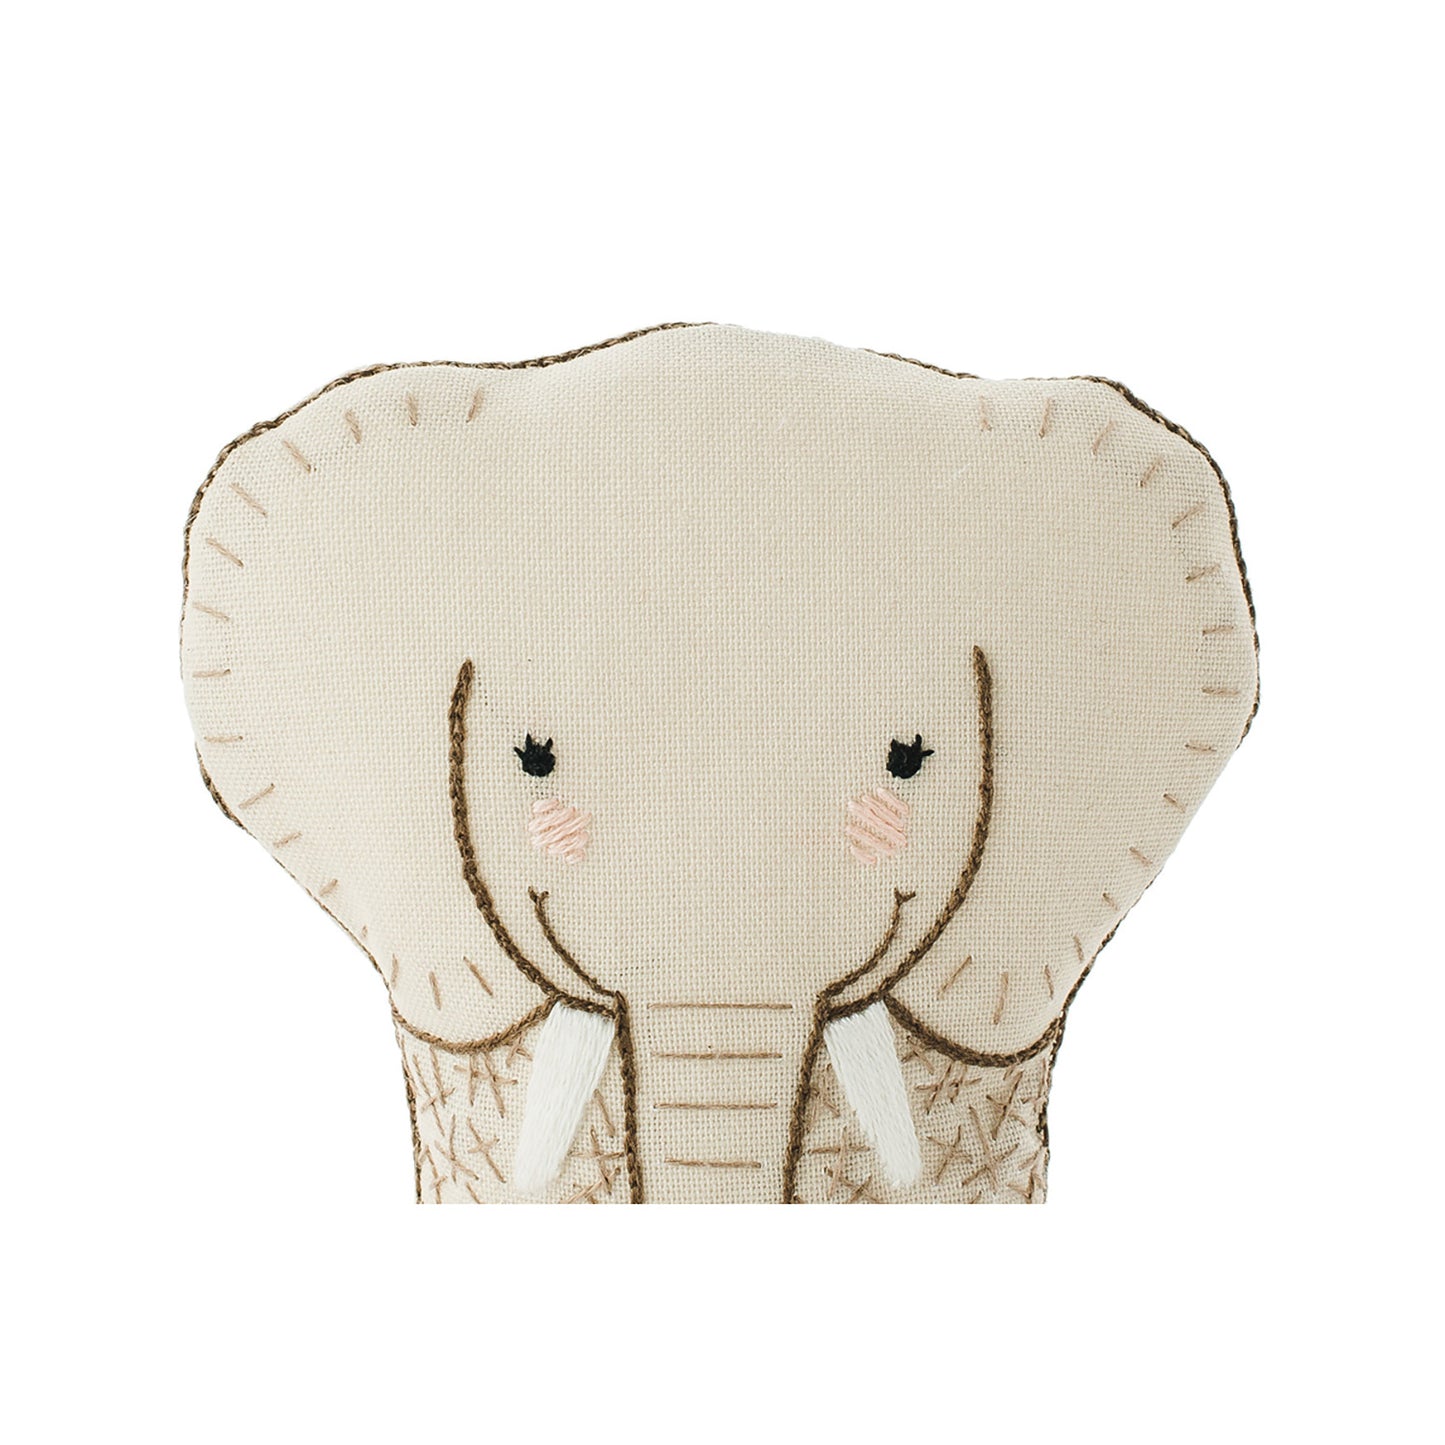 D.I.Y. Embroidered Doll Kit - Elephant Alternative View #1